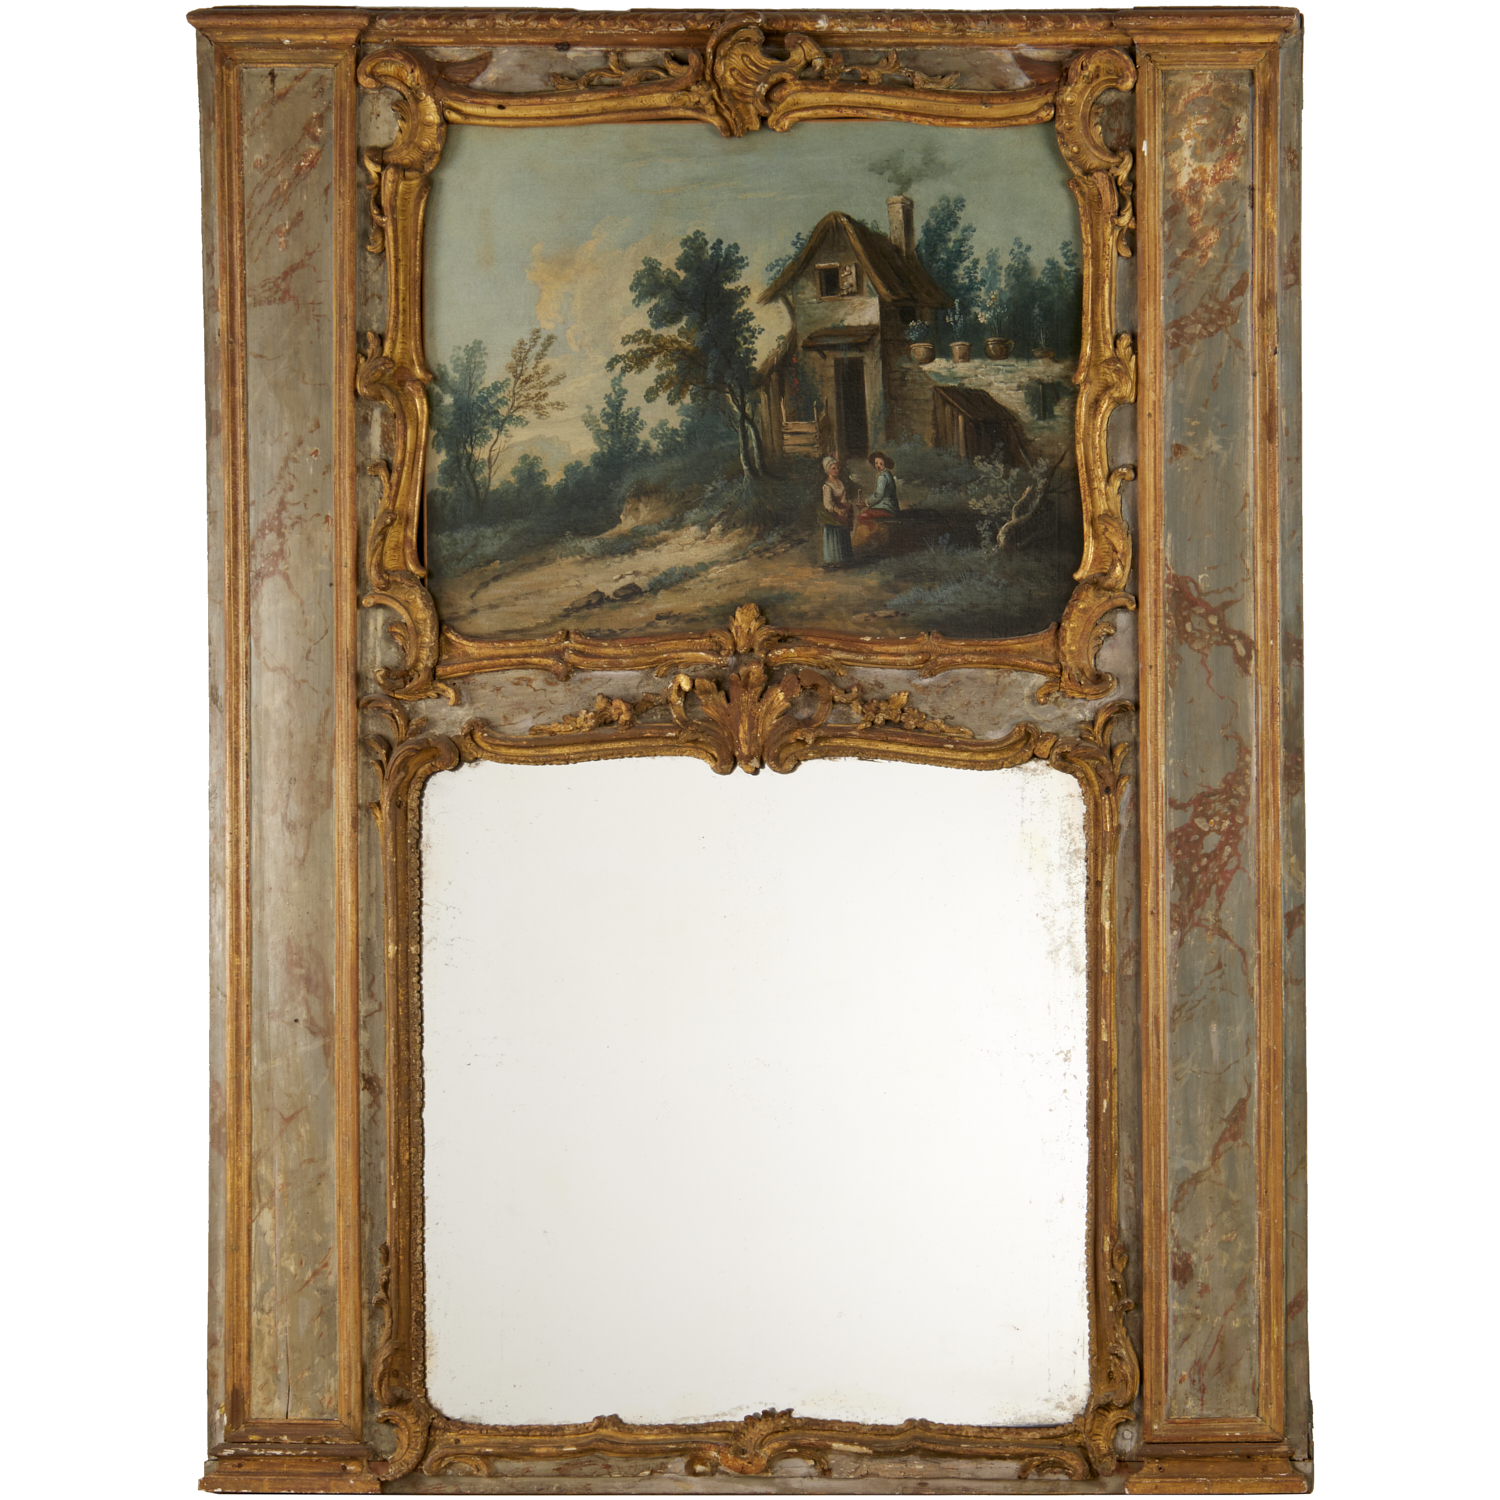 ANTIQUE LOUIS XV STYLE PAINTED